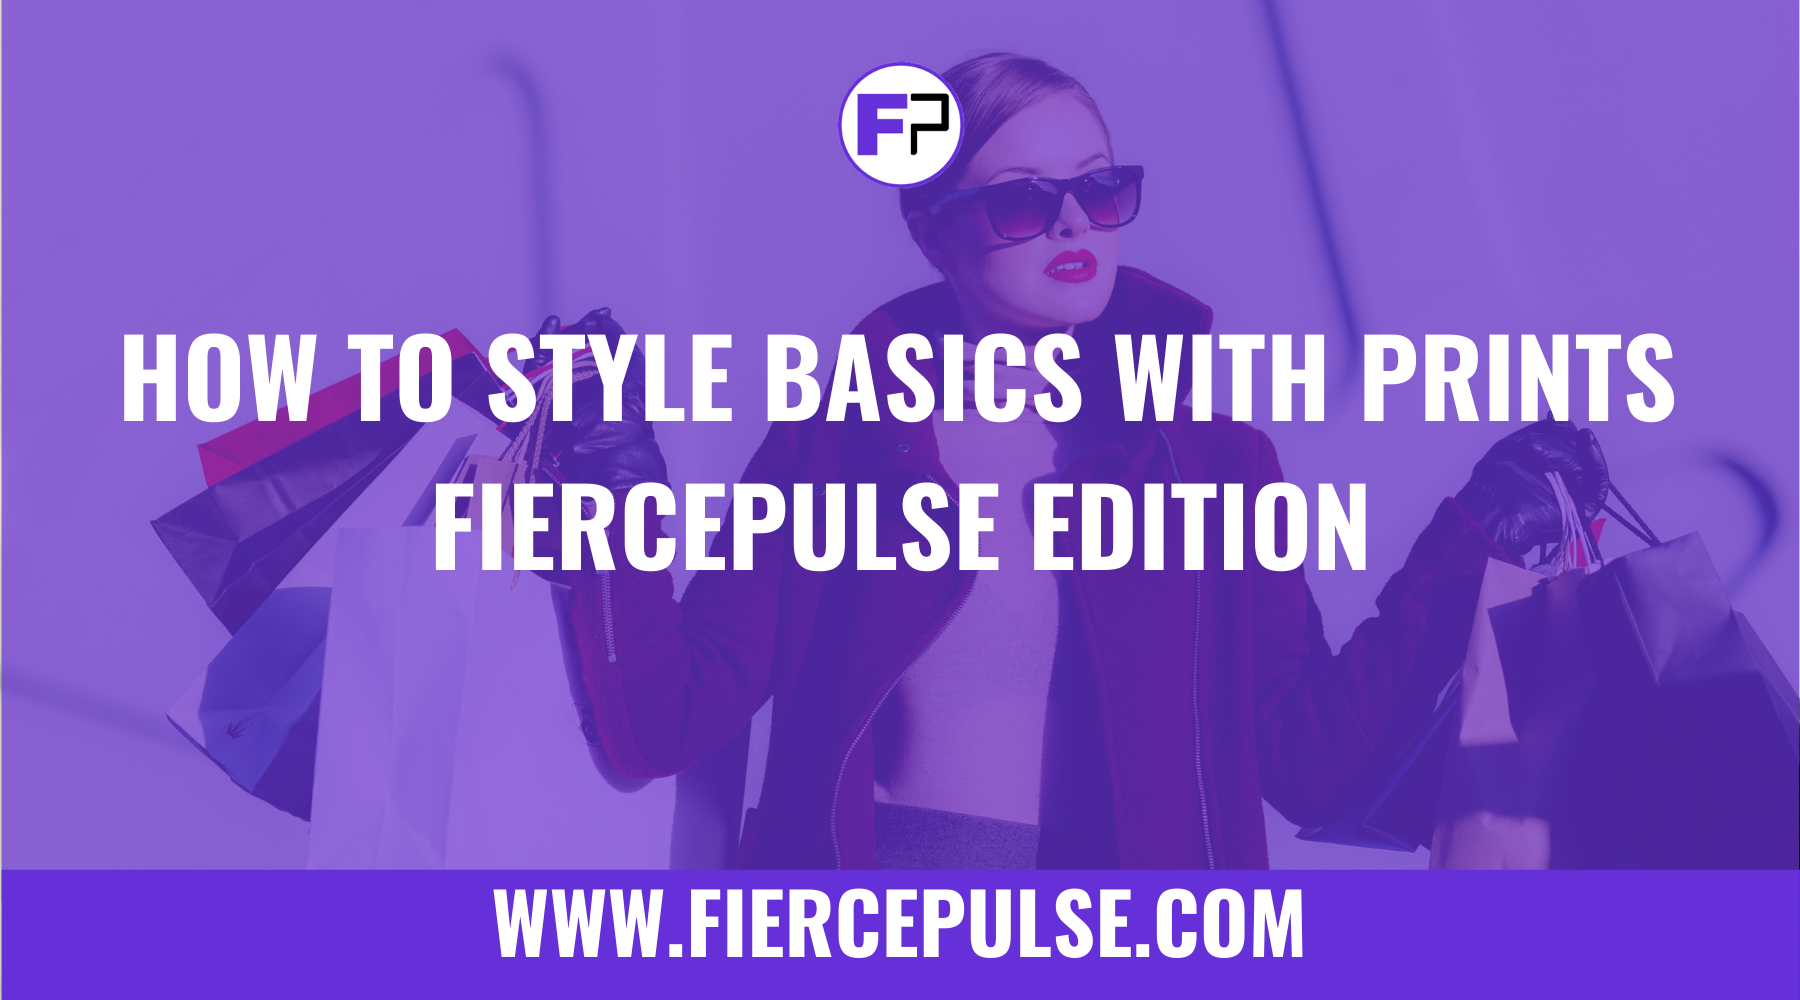 How to Style Basics with Prints - FIERCEPULSE Edition